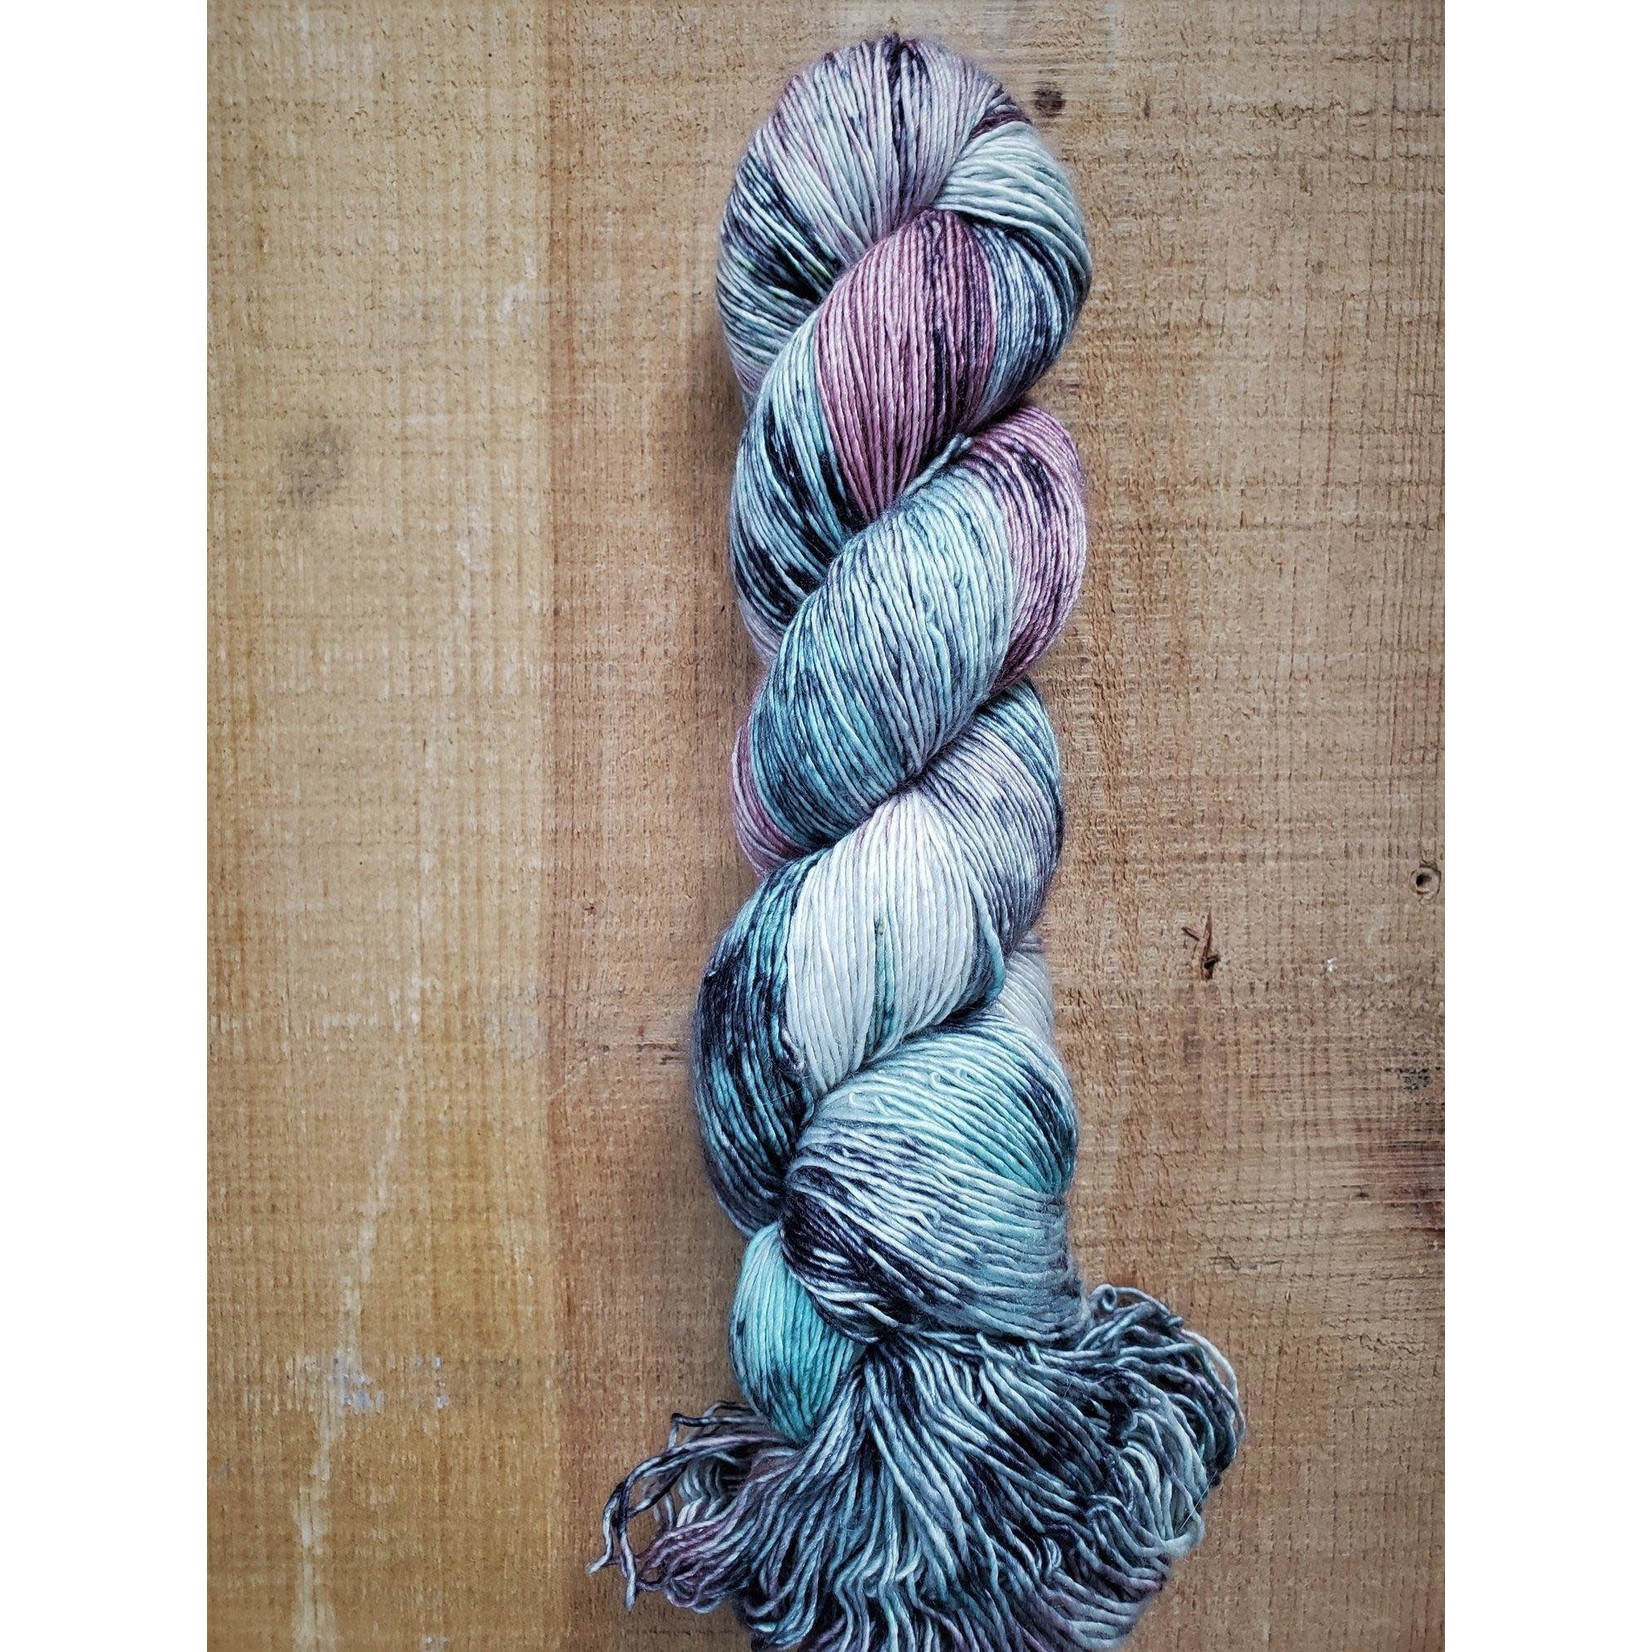 The Farmer's Daughter Fibers Foxy Lady Speckles, Suspicious Minds